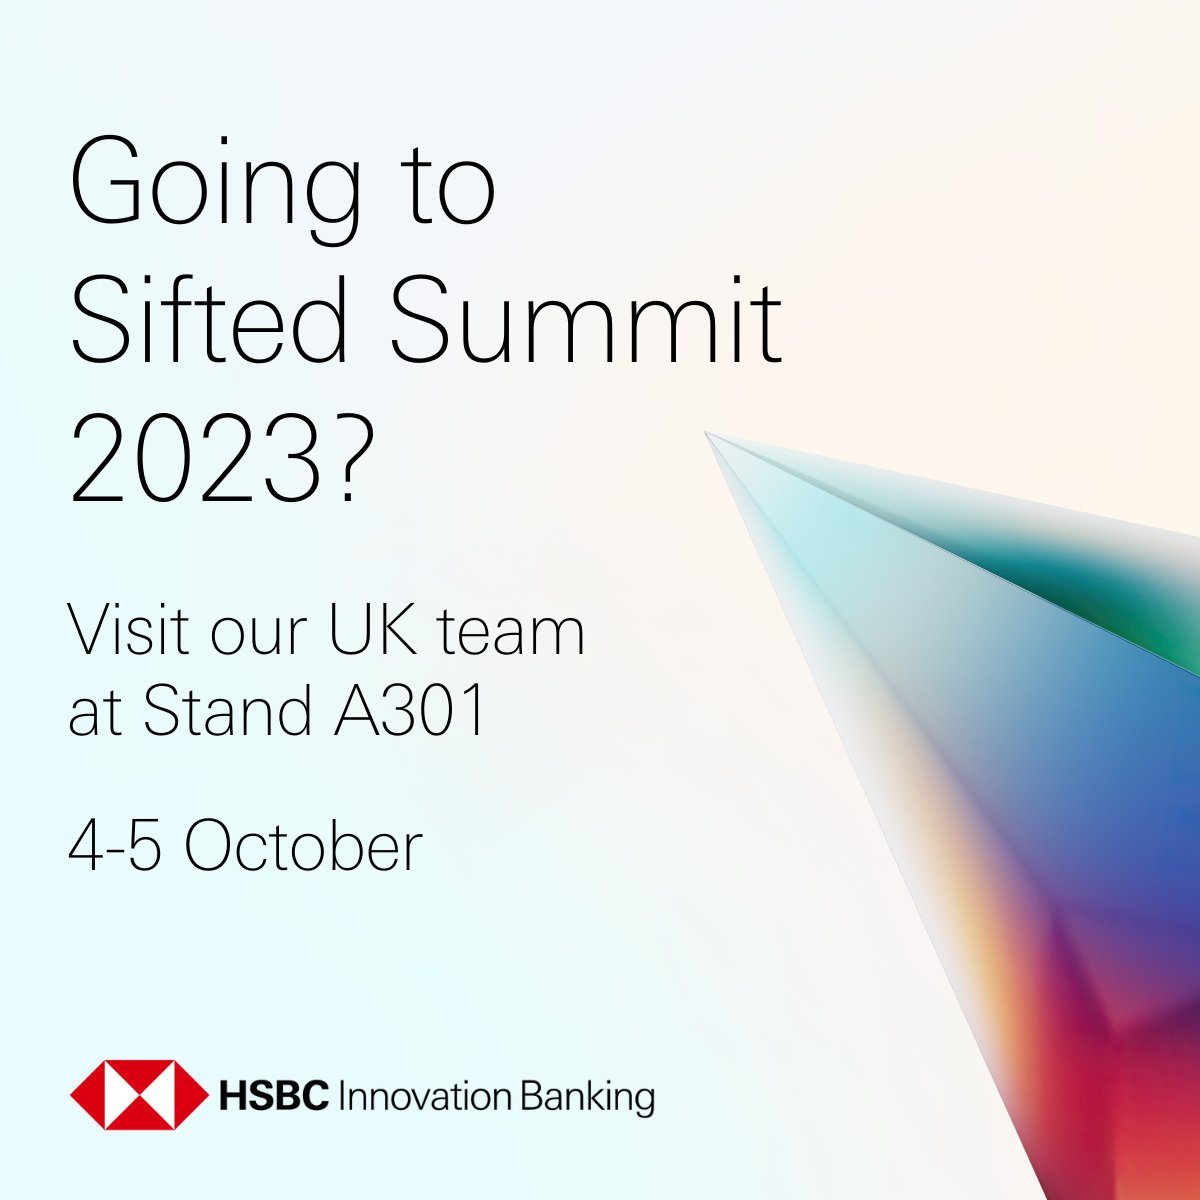 💡 We're excited to be attending @Siftedeu Summit 2023 alongside an amazing line-up of speakers, sessions and networking events. 

To keep you fuelled throughout, we’ll have two coffee stations, so drop by for your pre or post-session caffeine fix. 

#SiftedSummit #Innovation